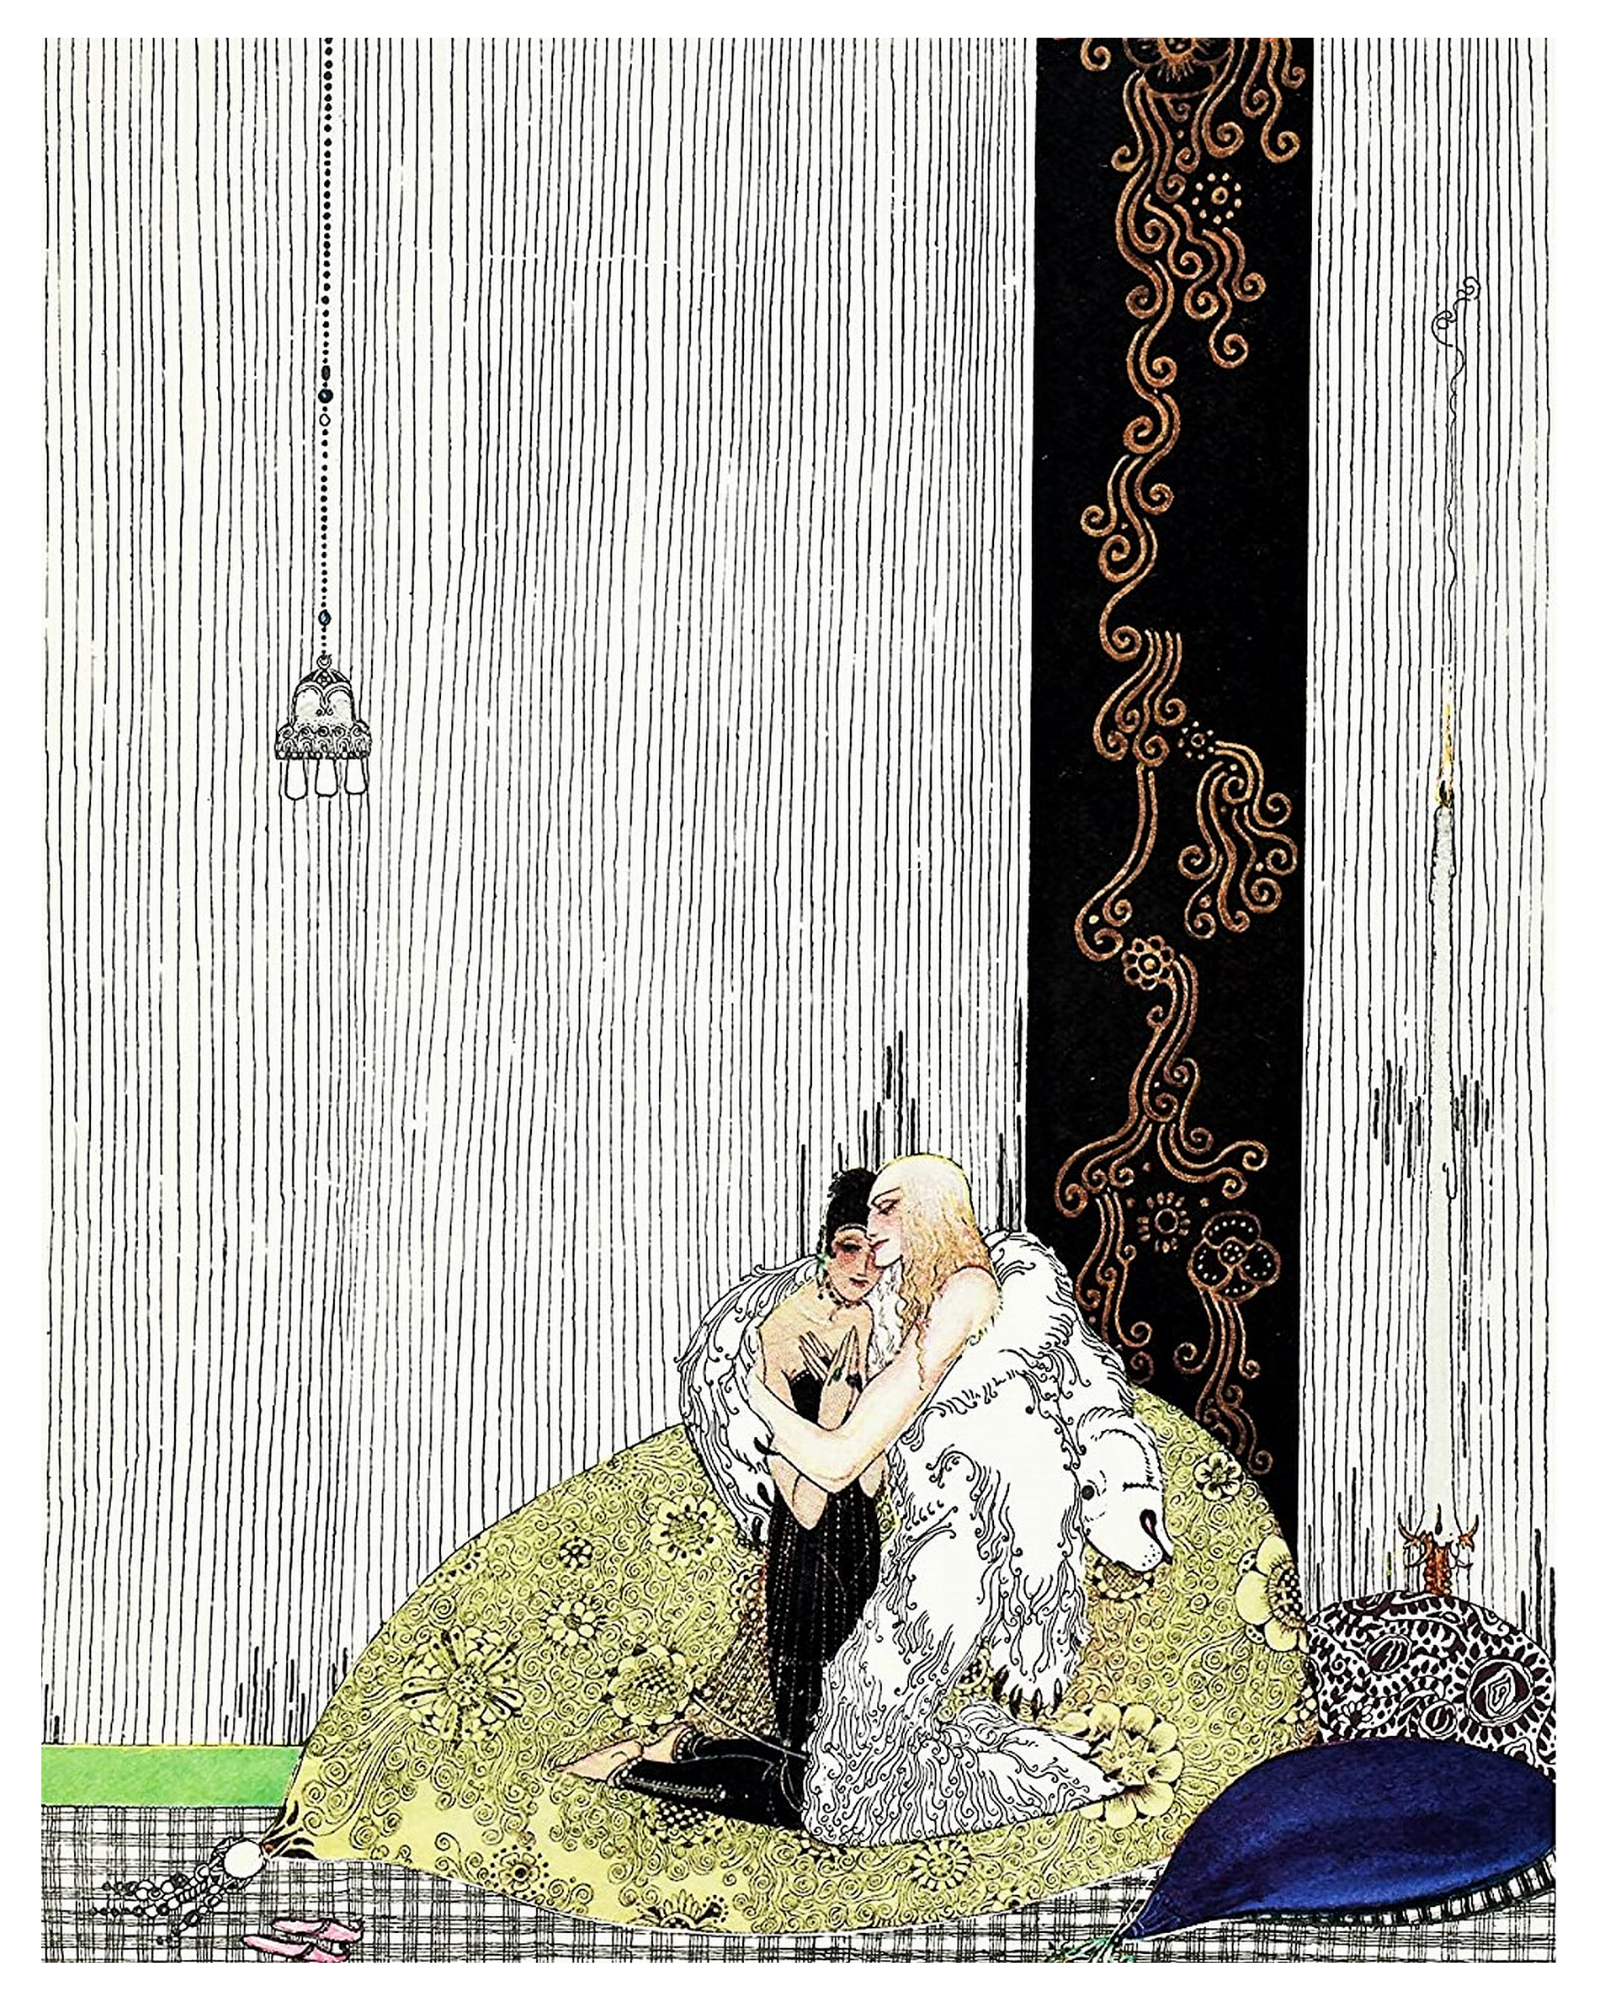 Fairytale & Folklore Poster - Kay Nielsen, The Lad in the Bearskin, 8X10